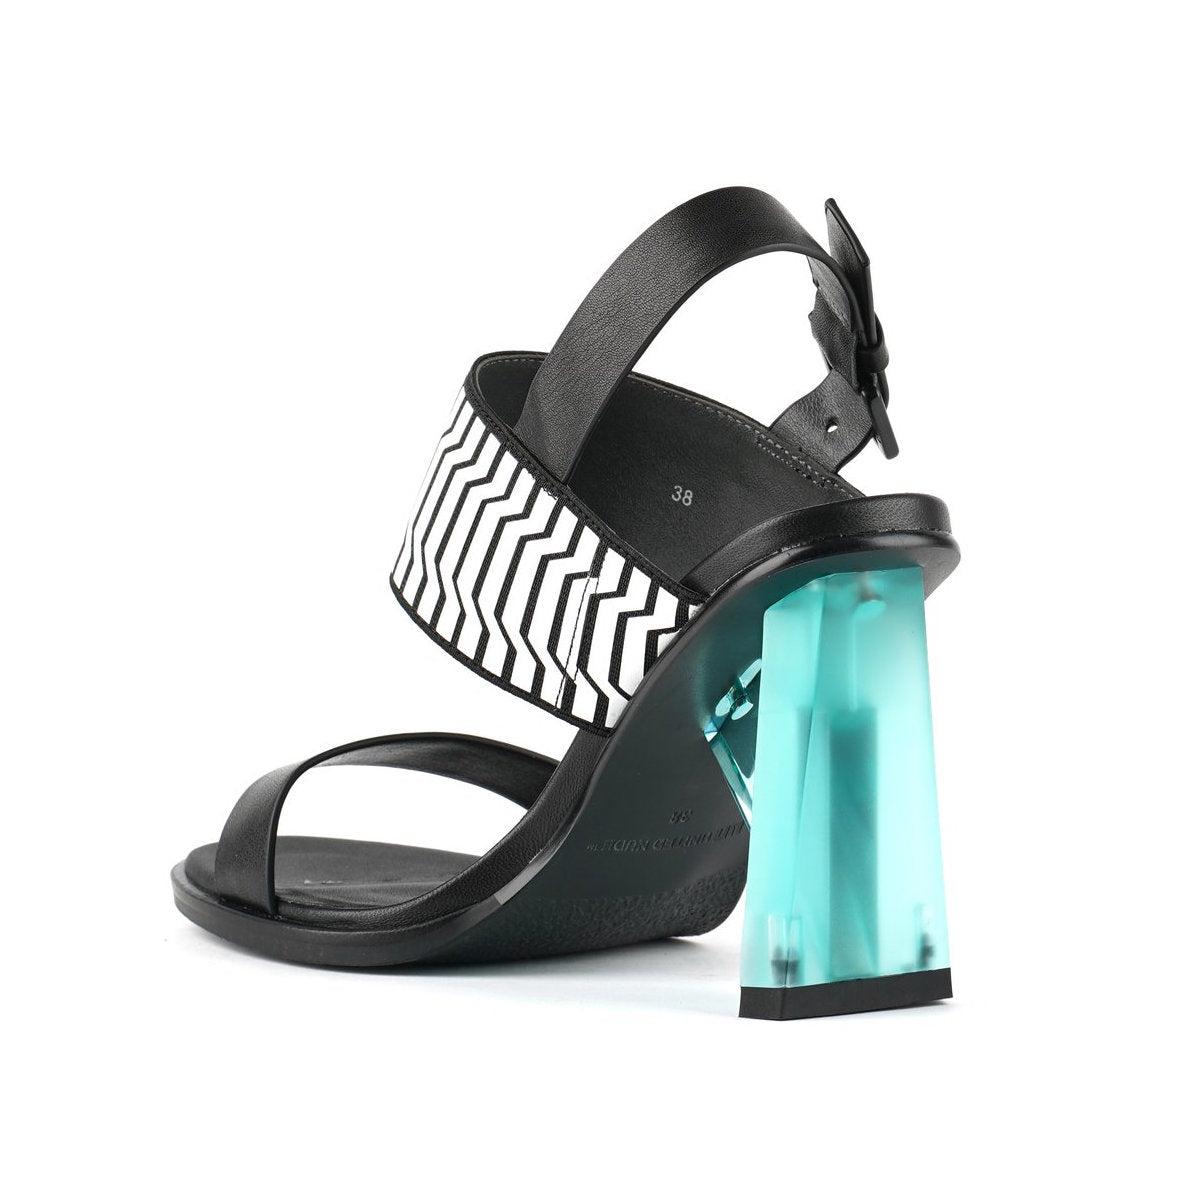 Inner back view of the united nude spark sandal hi II. This high heel has a strap over the instep and a strap over the toes. This shoe is black with a blue heel and it has an adjustable buckle strap behind the heel.